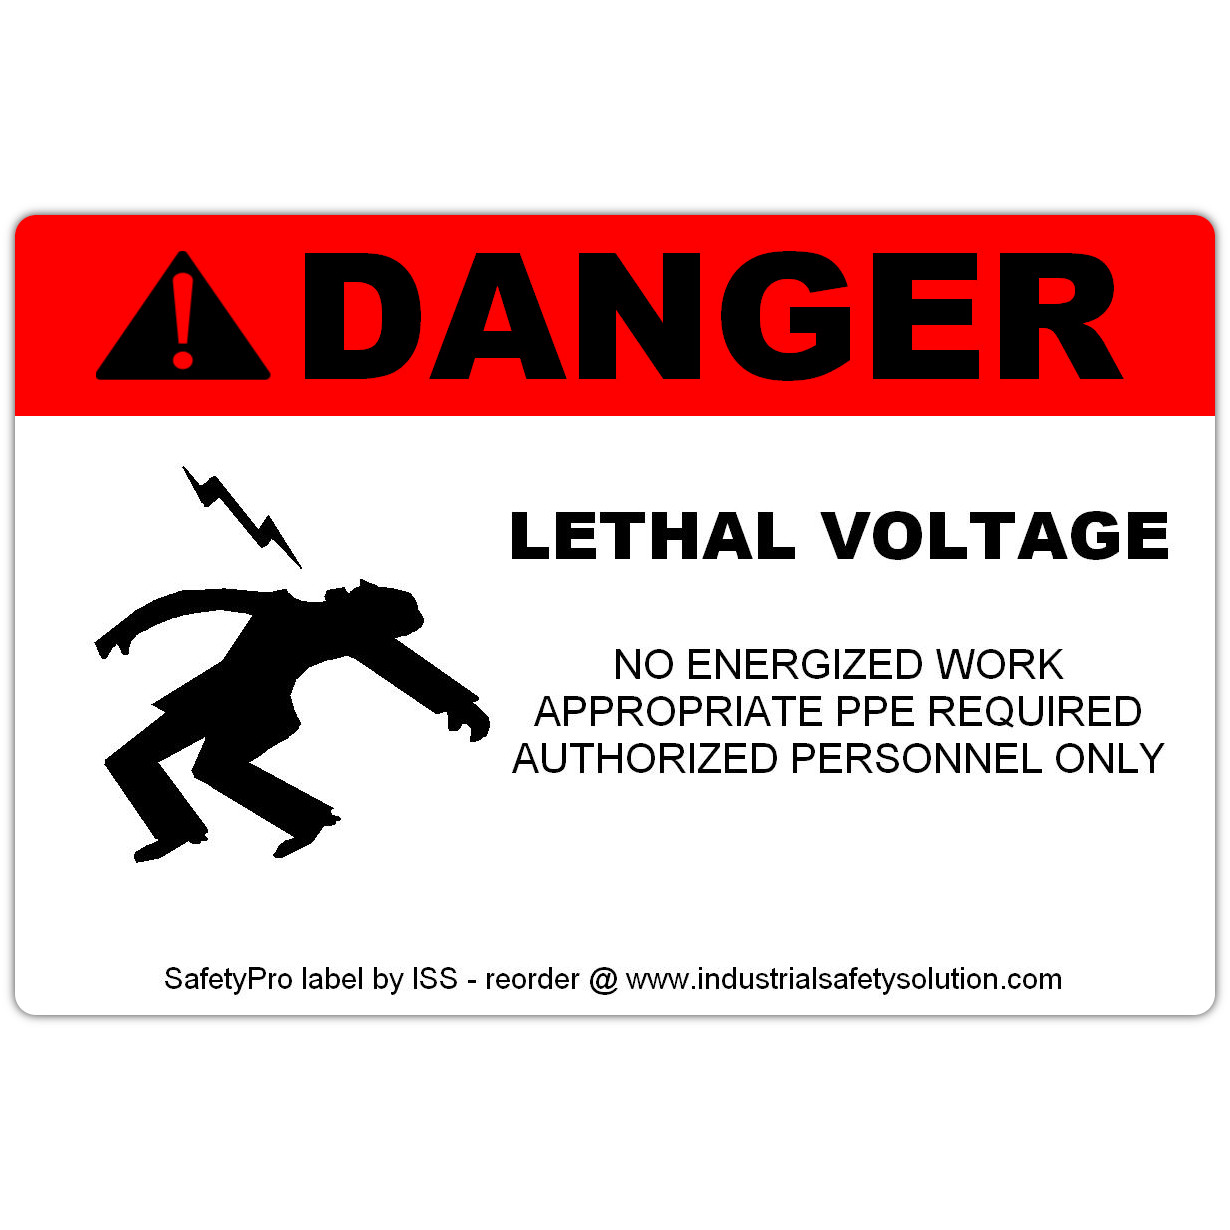 Ask a question about 4" x 6" DANGER Lethal Voltage Safety Label